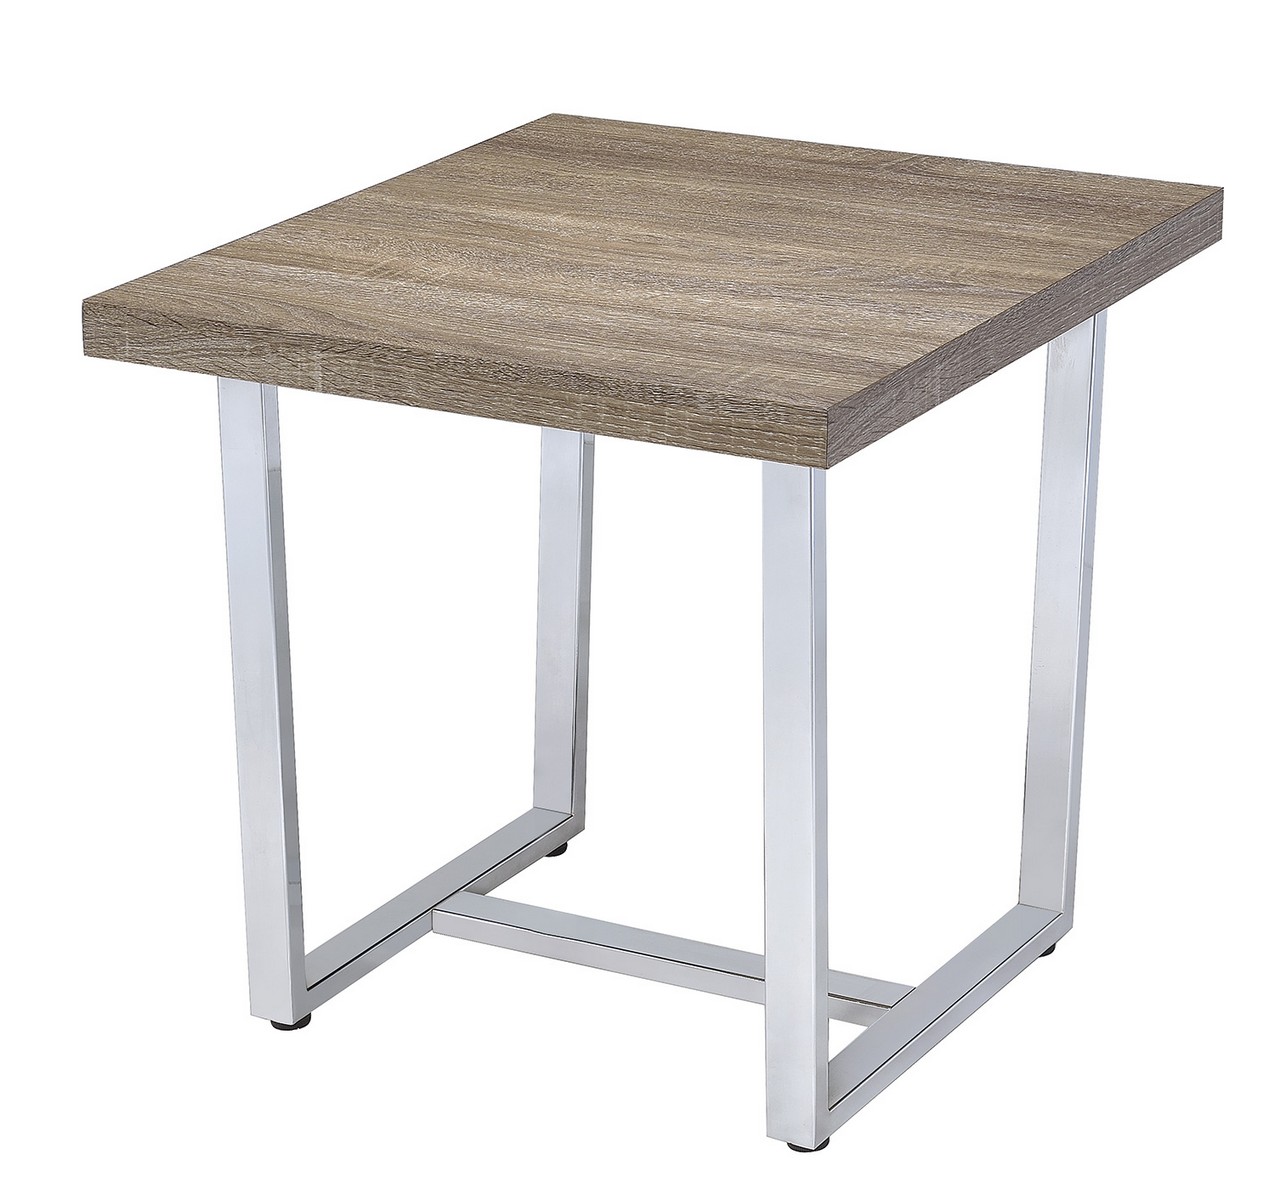 Coaster 704187 End Table - Weathered Taupe/chrome Metal